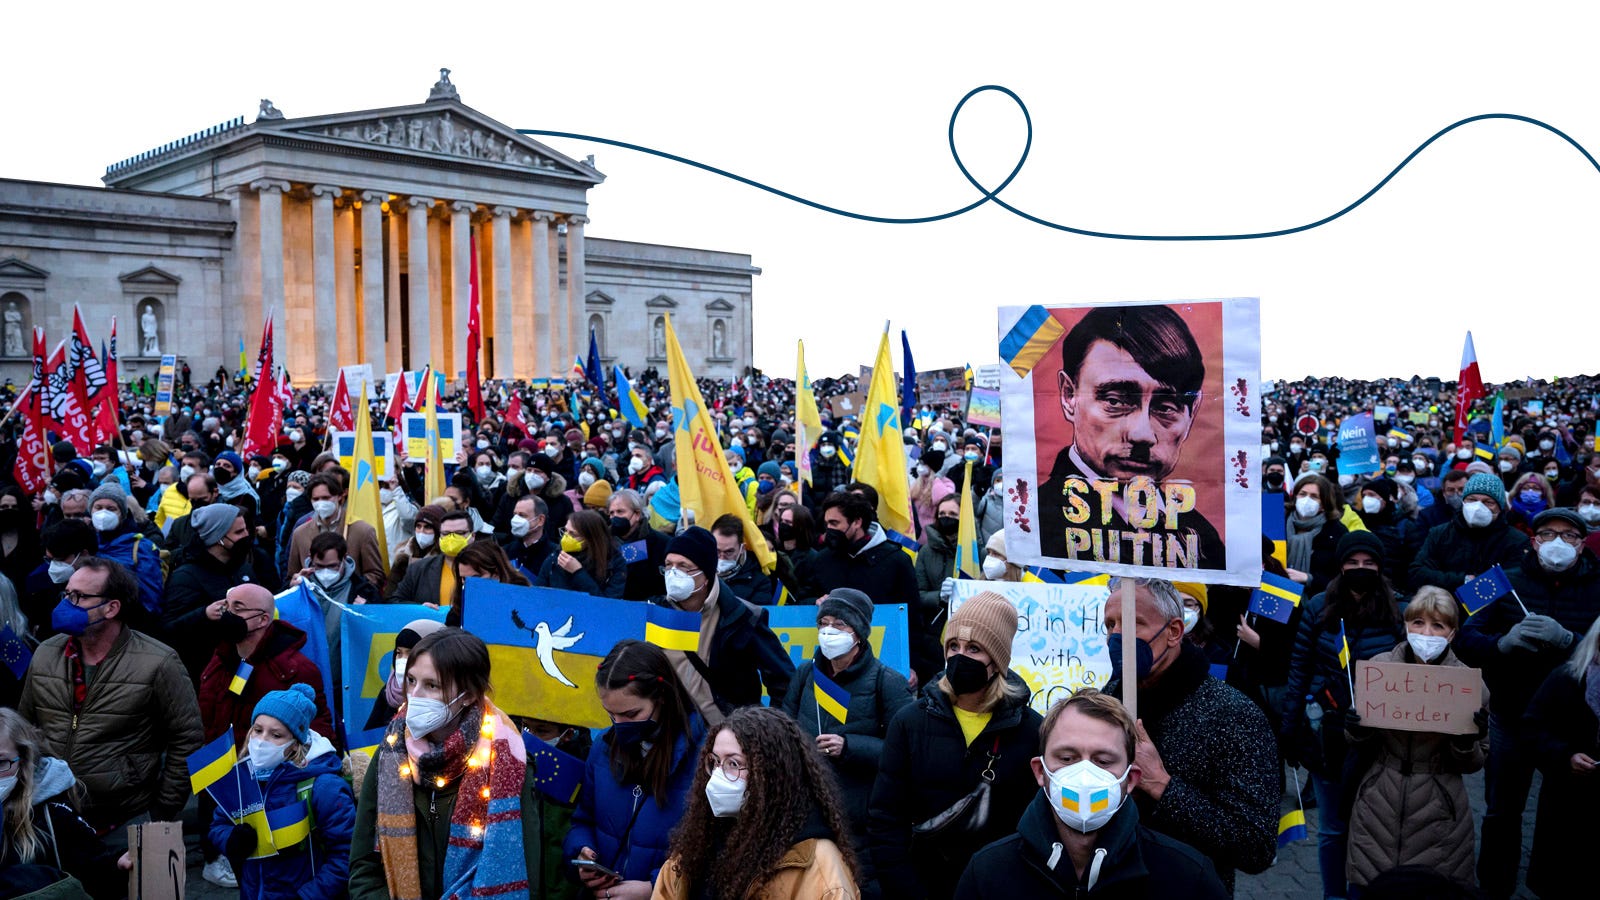 Demonstrators protest against the war in Ukraine in Munich, Germany, Wednesday, March 2, 2022.